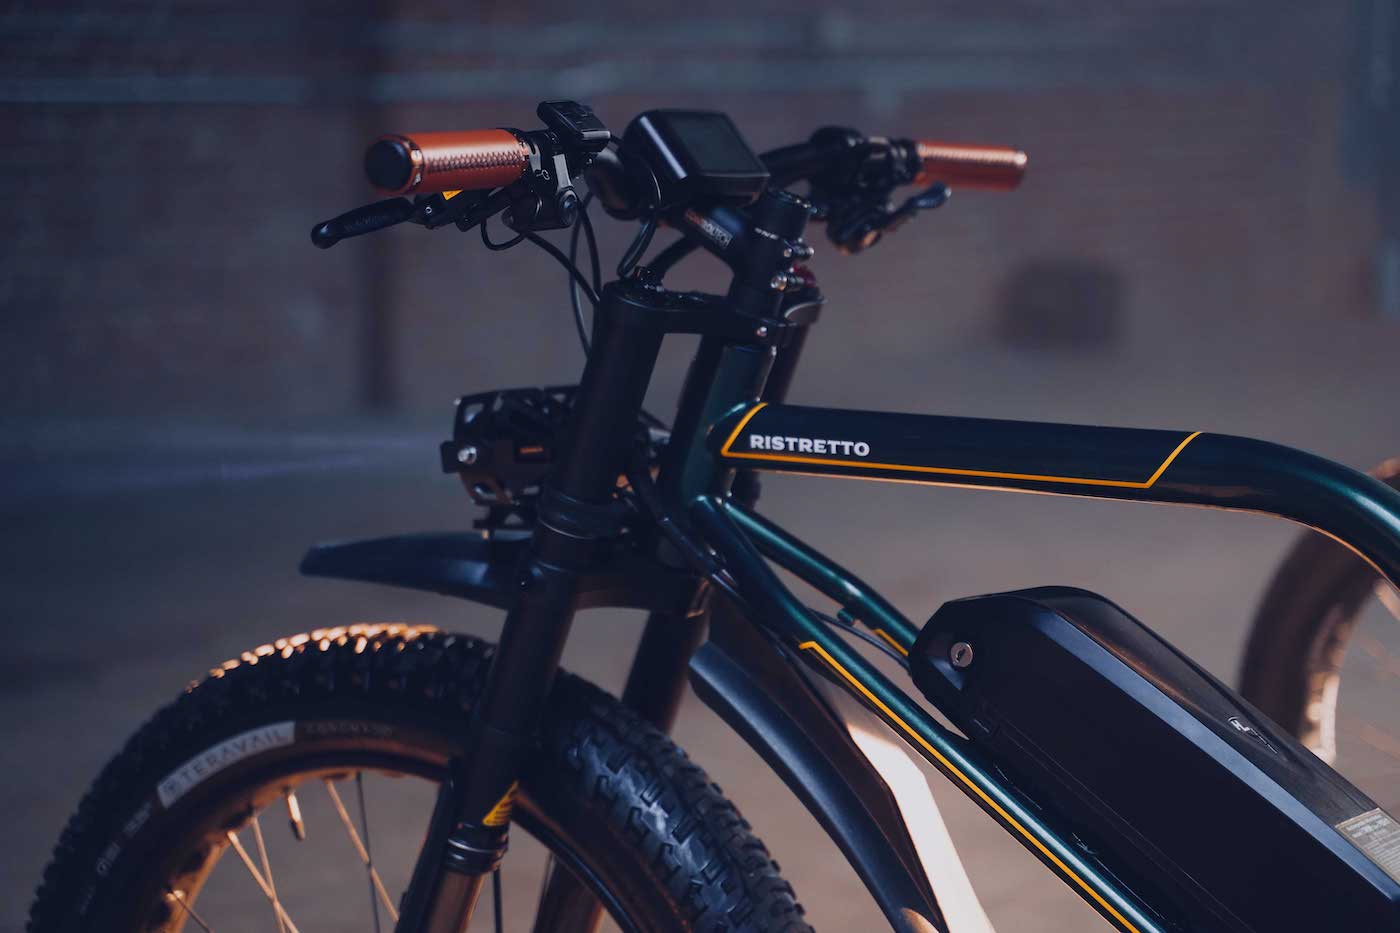 This new 40 MPH electric bike puts a fresh spin on middrive mopeds